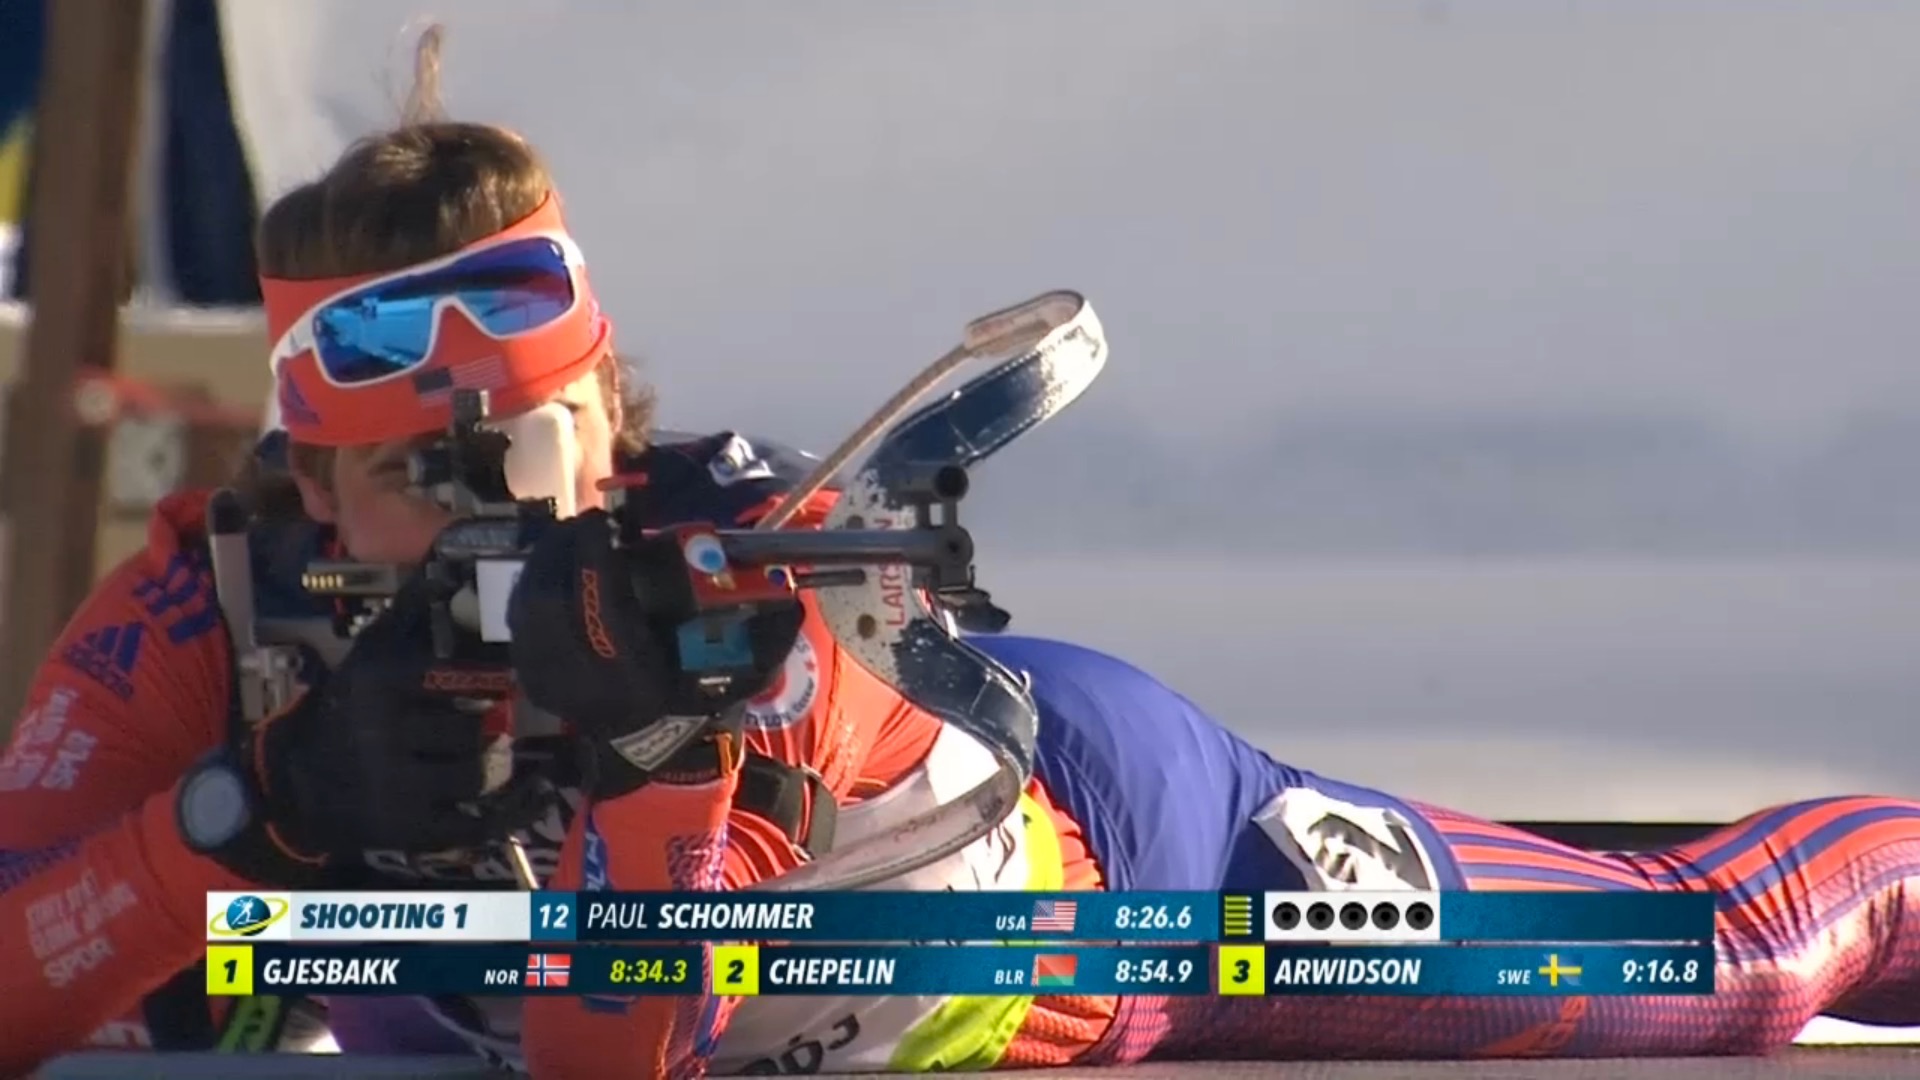 US Biathlon’s Paul Schommer shooting prone in the men’s 10 k sprint at the 2017 IBU Open European Championships in Duszniki-Zdrój, Poland. He was the top North American on Friday in 58th. (Photo: IBU/Eurovisionsports.tv screenshot)